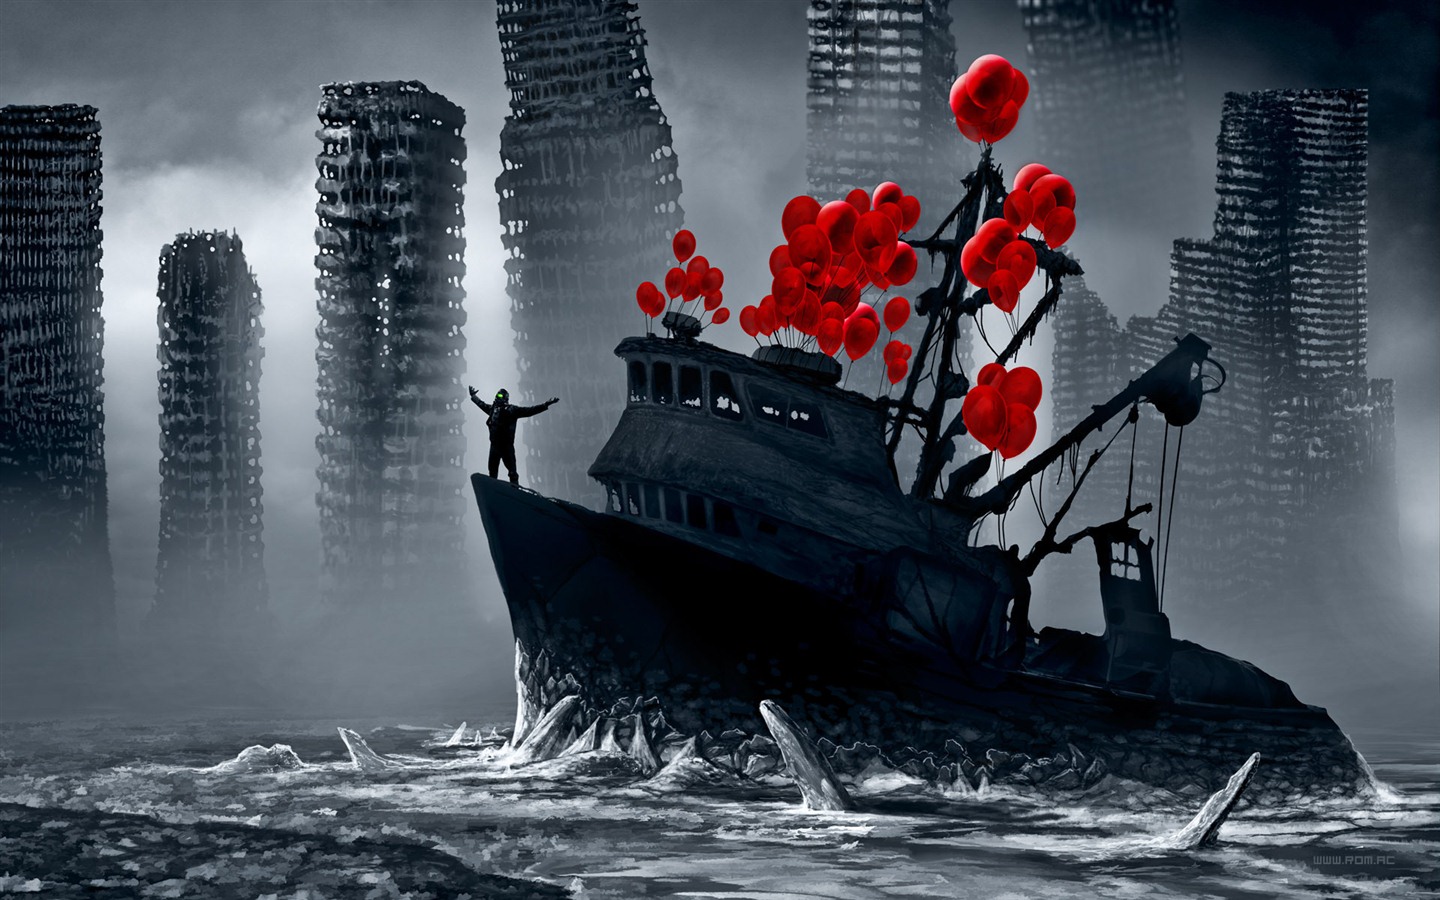 Romantically Apocalyptic creative painting wallpapers (2) #19 - 1440x900